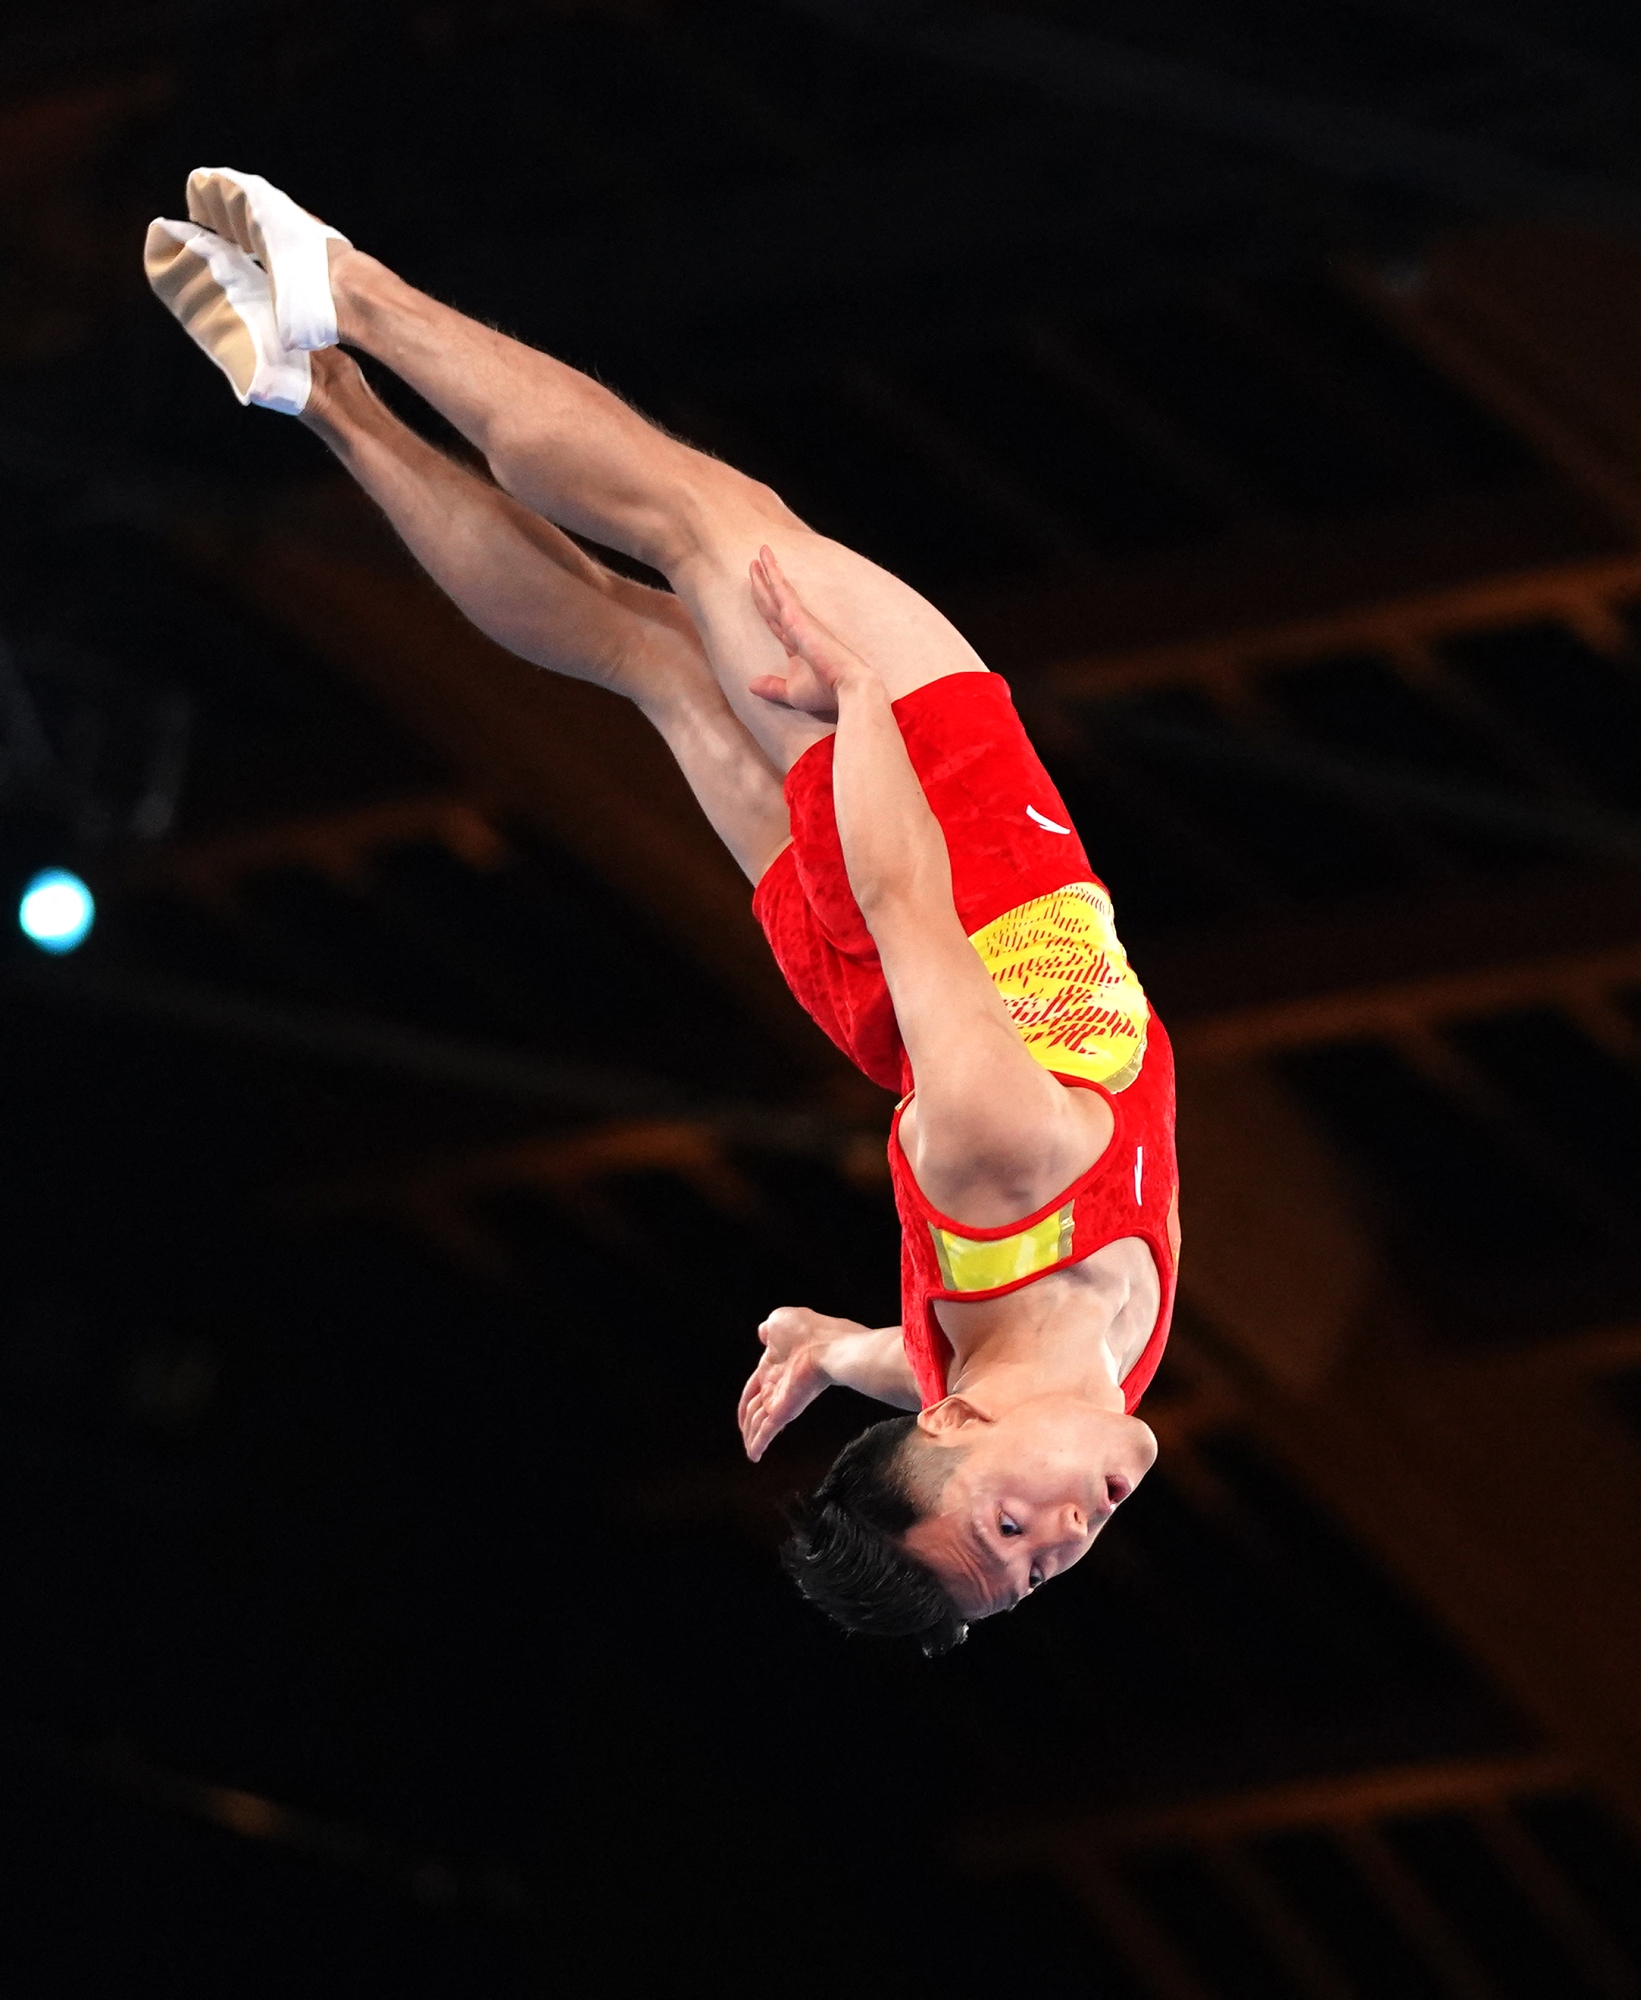 (210731) -- TOKYO, July 31, 2021 (Xinhua) -- Dong Dong of China competes during the trampoline gymnastics men's final at the Tokyo 2020 Olympic Games in Tokyo, Japan, July 31, 2021. (Xinhua/Cheng Min) (Photo by Cheng Min / XINHUA / Xinhua via AFP)